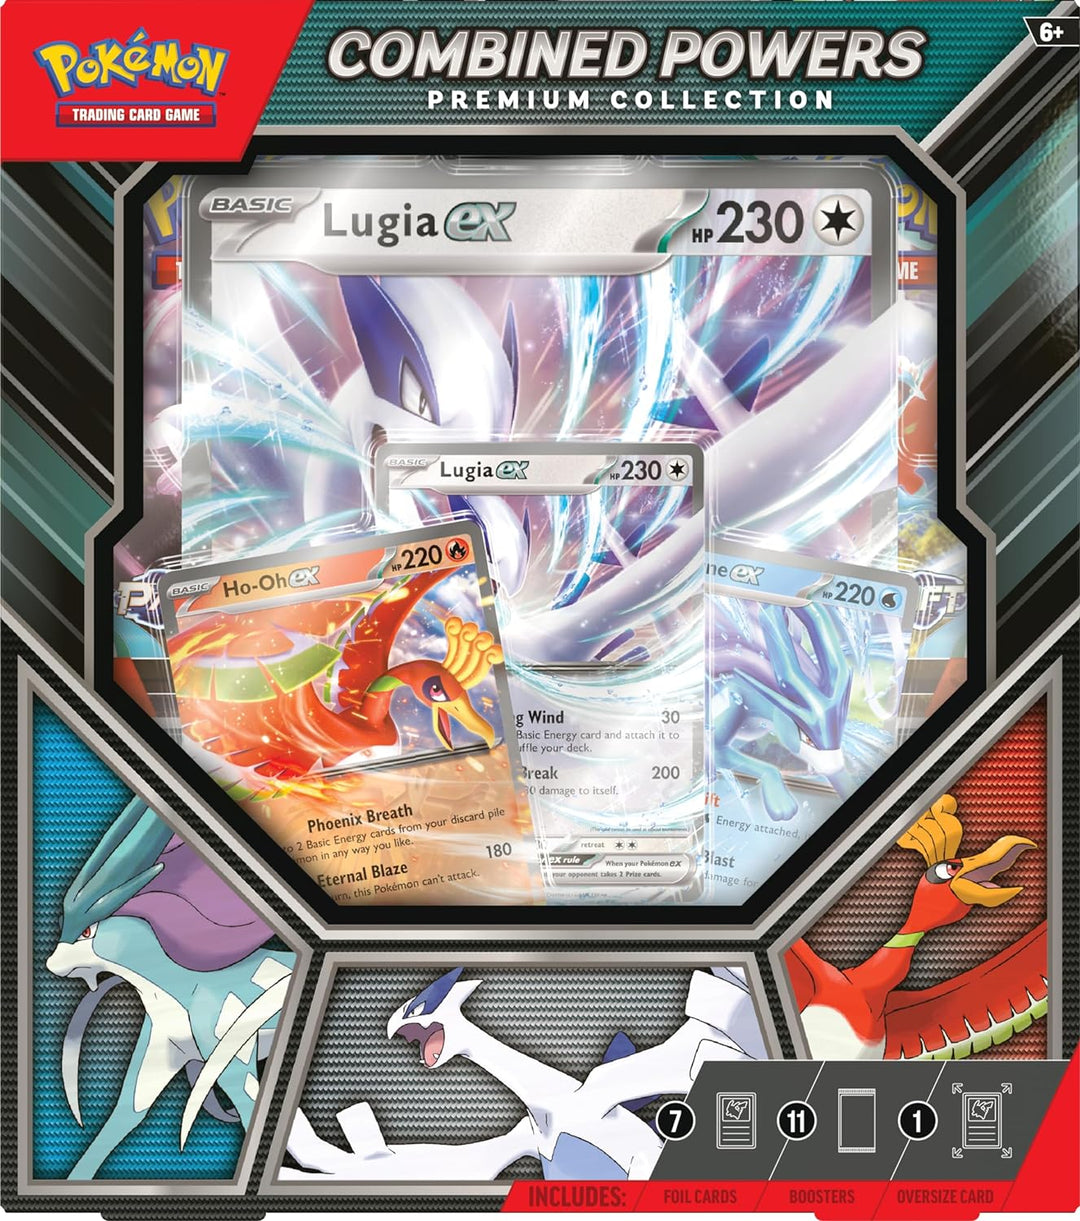 Pokemon TCG: Combined Powers Premium Collection – English Language (7 Foil Cards)